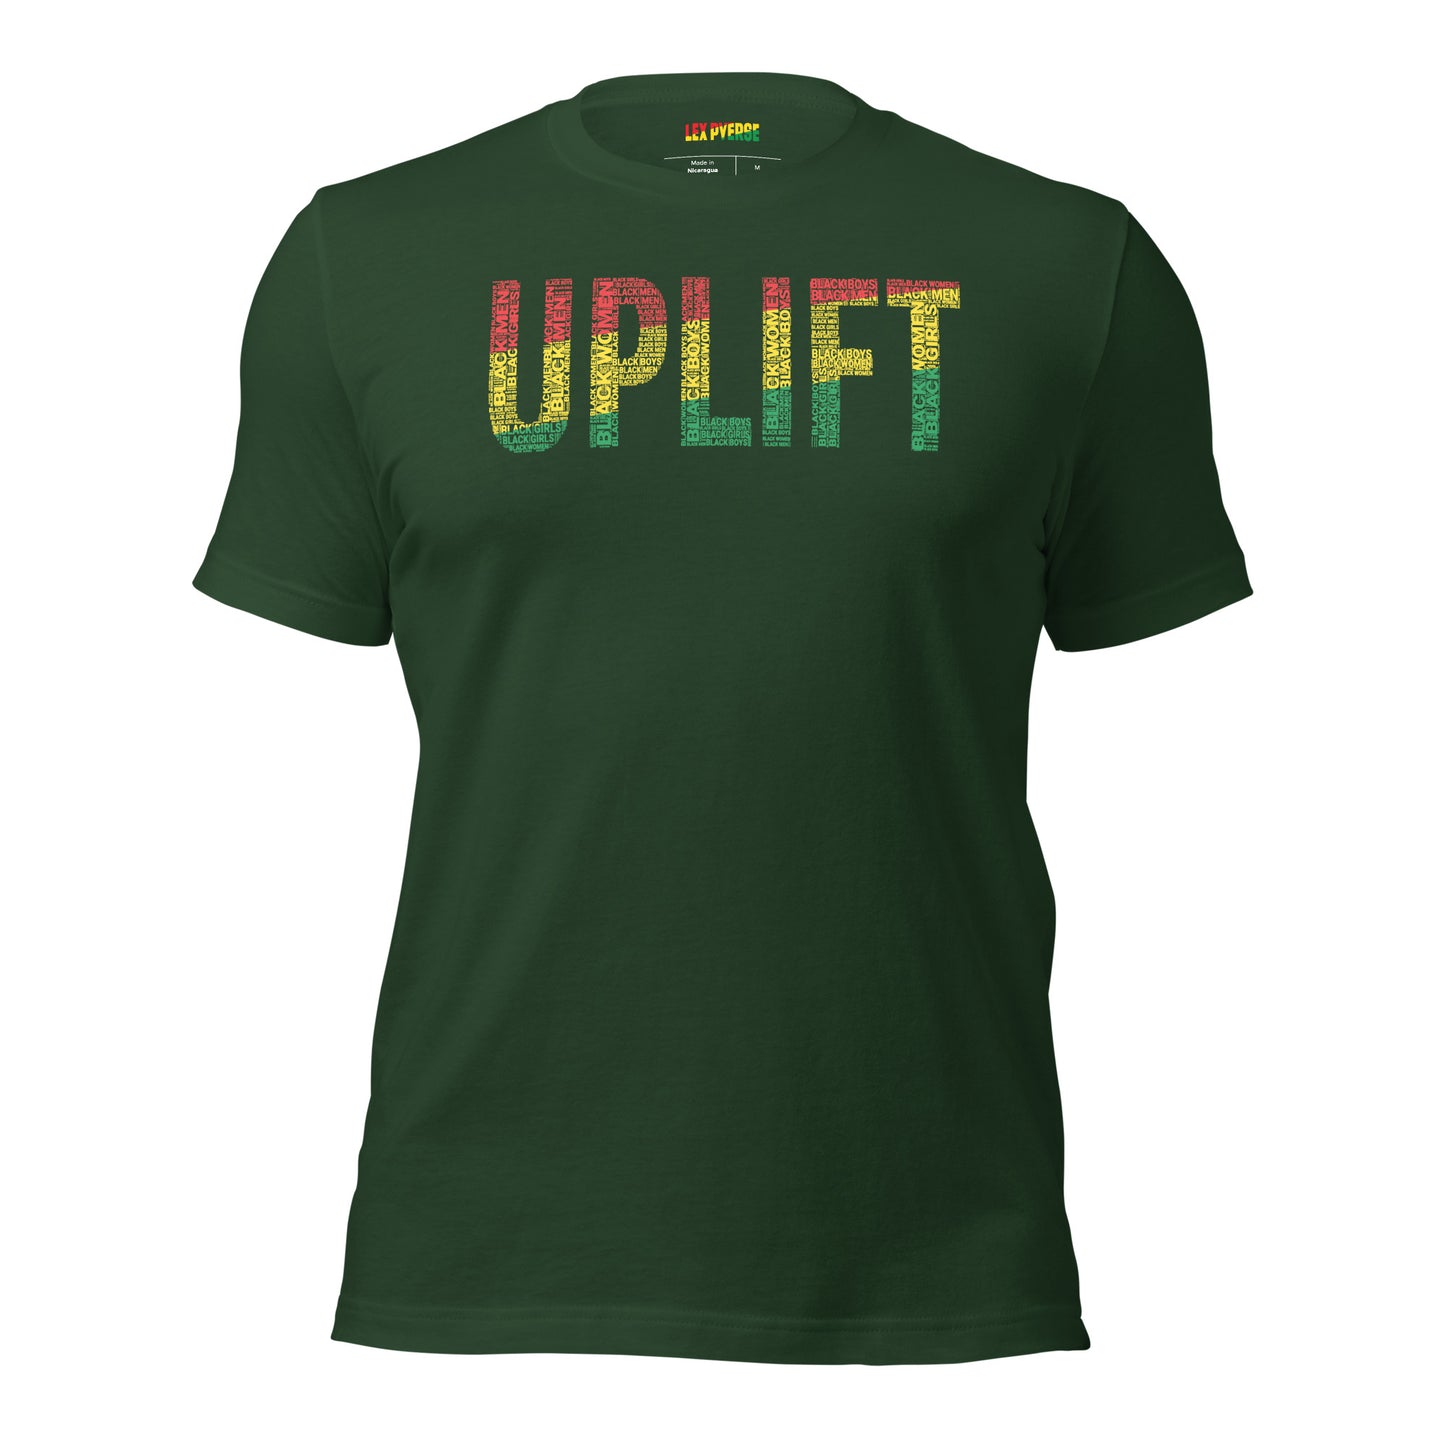 "UPLIFT" Pan-African Colored Word Cluster Short-Sleeve Unisex T-Shirt